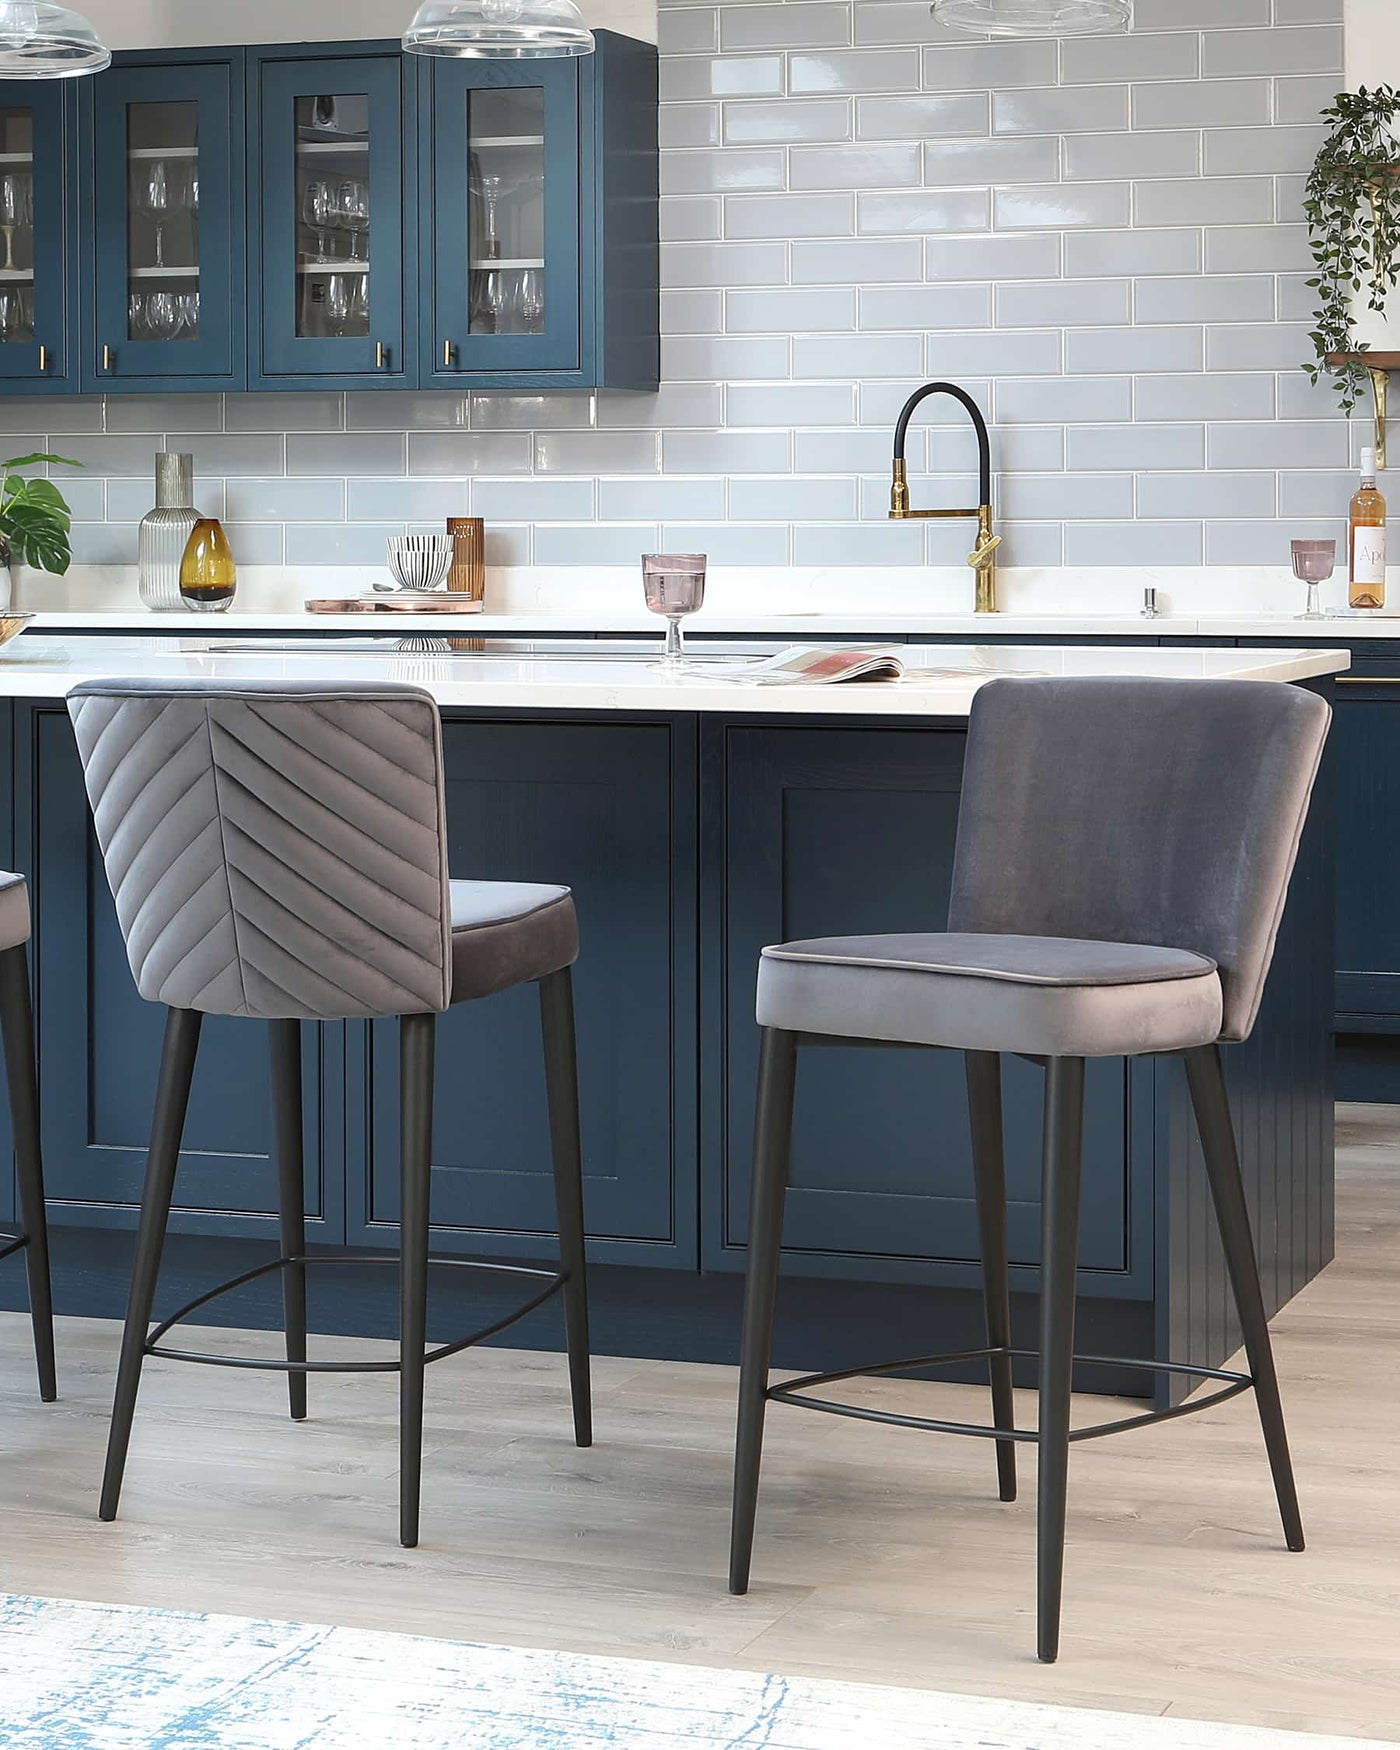 Two contemporary grey upholstered bar stools with channel tufting on the backrest, complemented by sleek black metal legs and footrests.